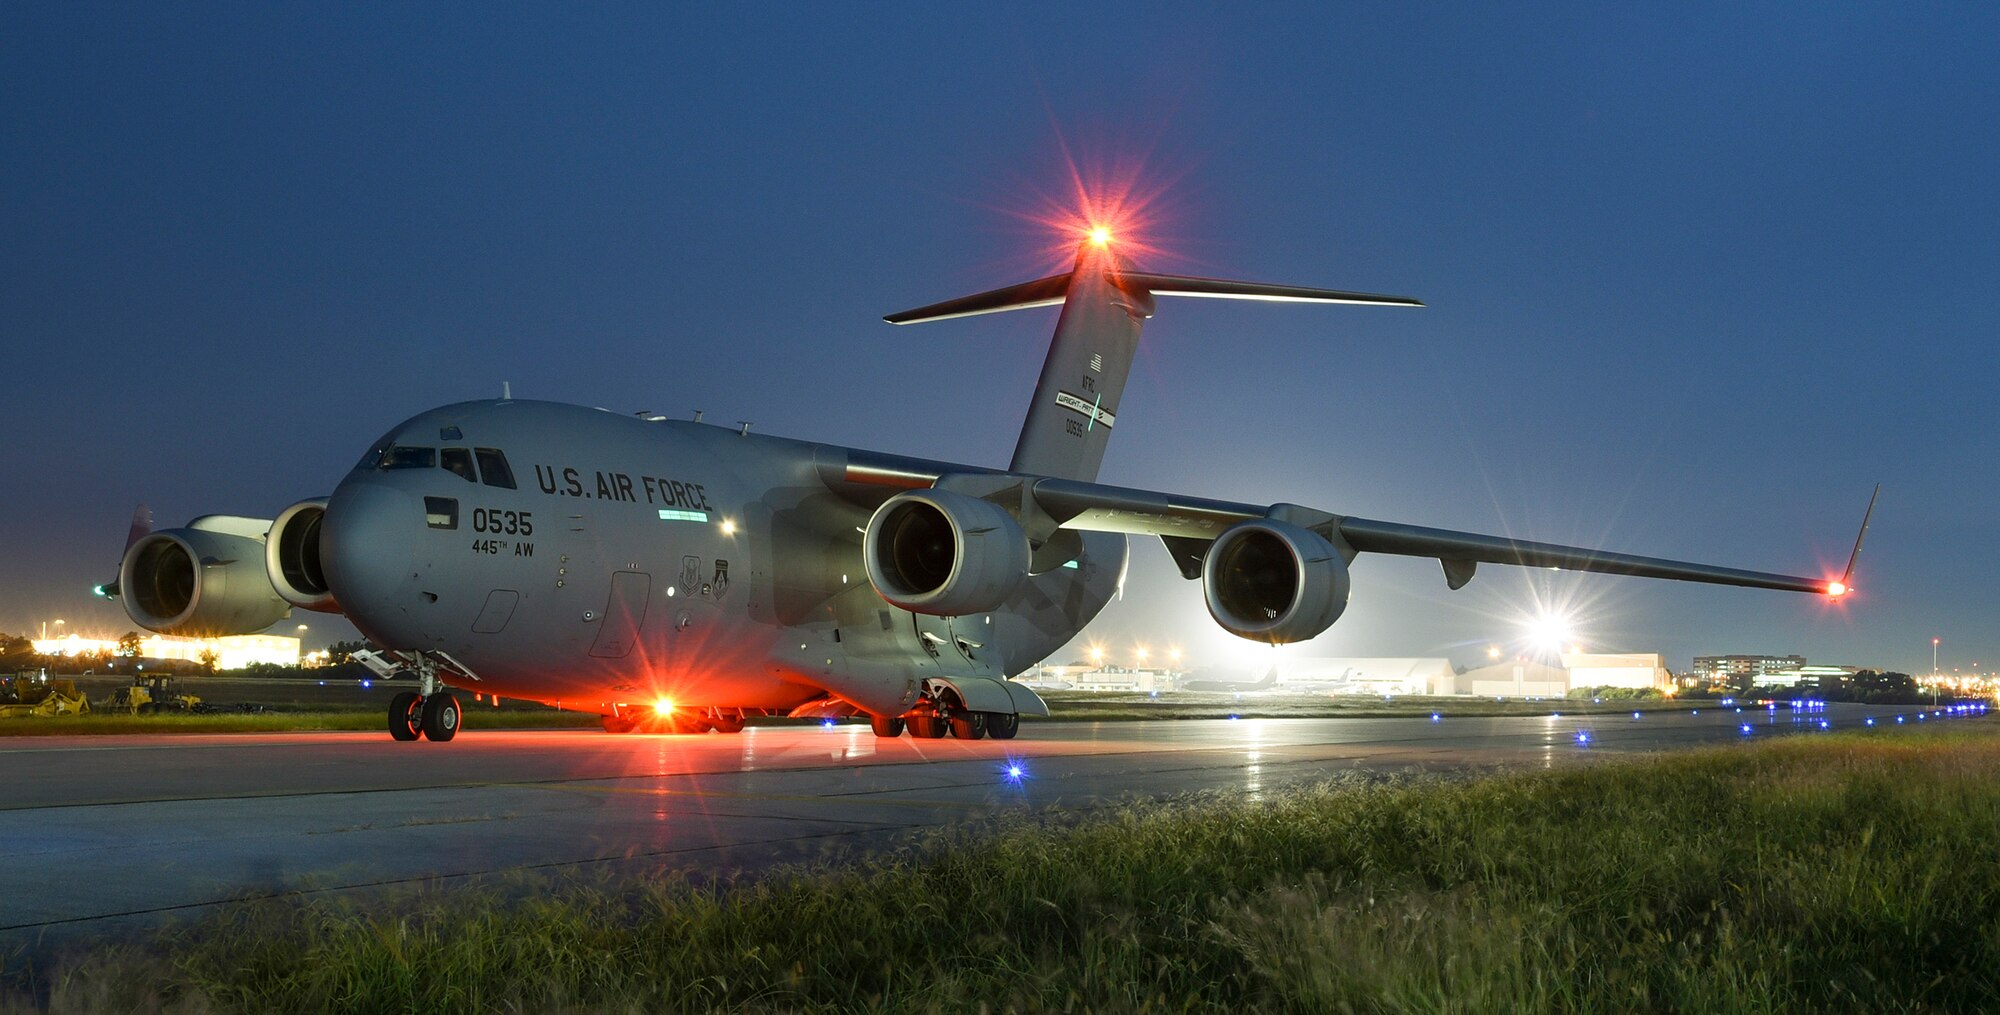 A C-17A Globemaster III from the 445th Airlift Wing, Wright-Patterson Air Force Base, Ohio, Air Force Reserve Command, prepares to take off after picking-up Patriot missiles at Tinker Air Force Base, Oklahoma, Sept. 12, 2017. The C-17A is the primary airlifter used by Air Mobility Command. (U.S. Air Force photo/Greg L. Davis)